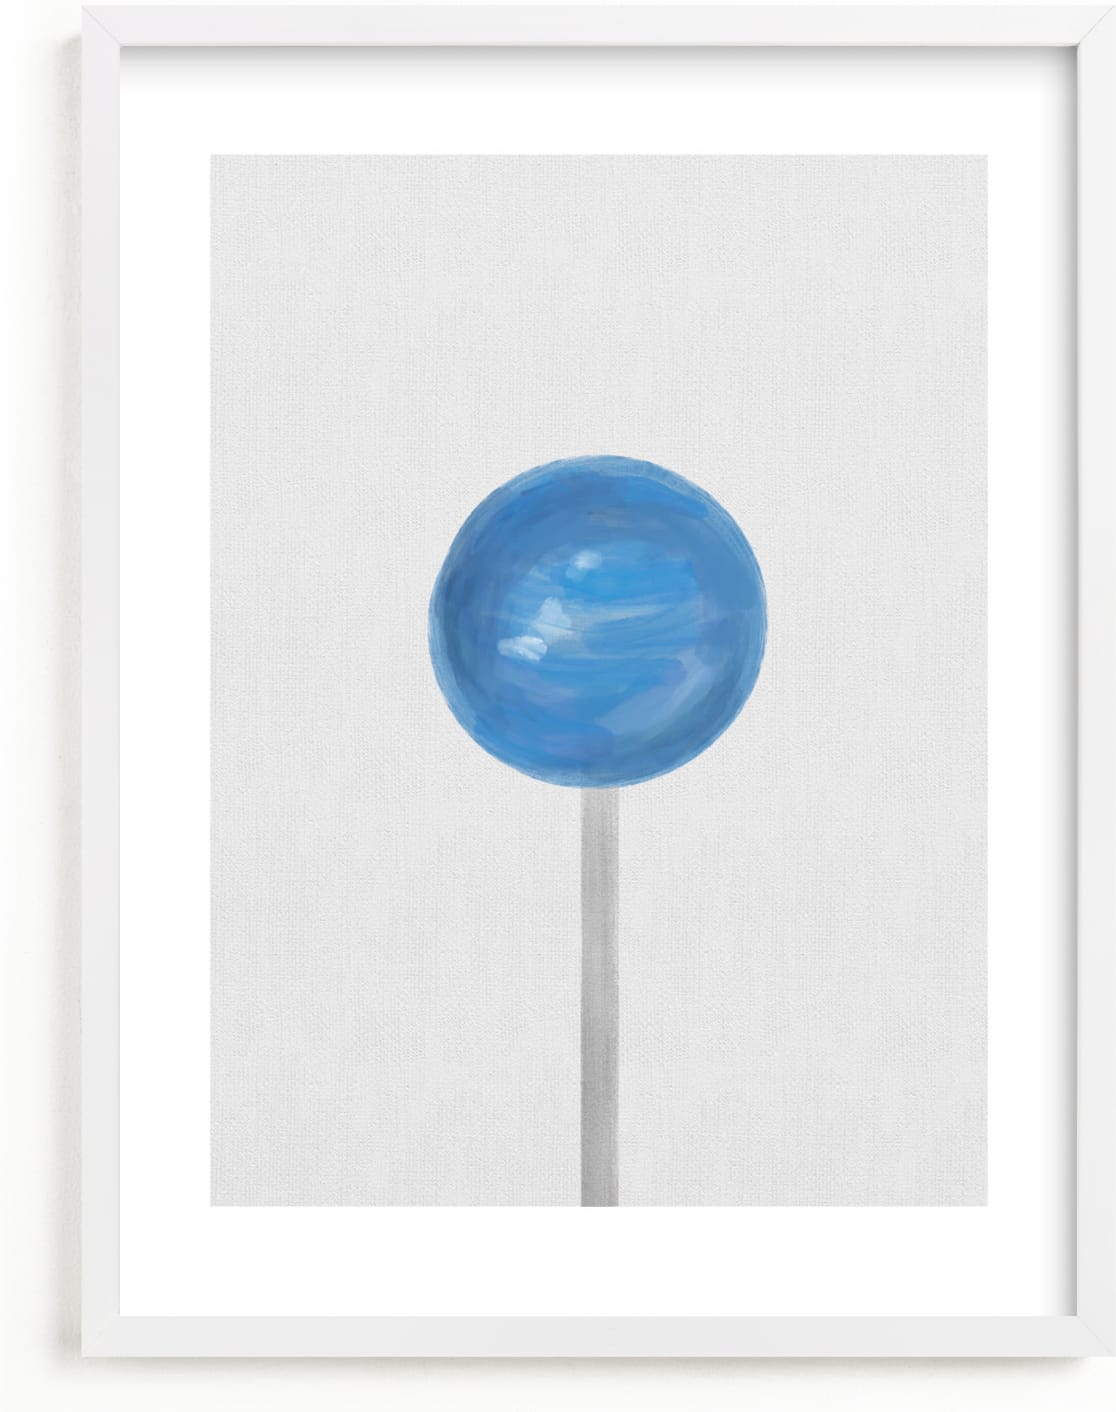 This is a blue kids wall art by Maja Cunningham called Lolli Pop.